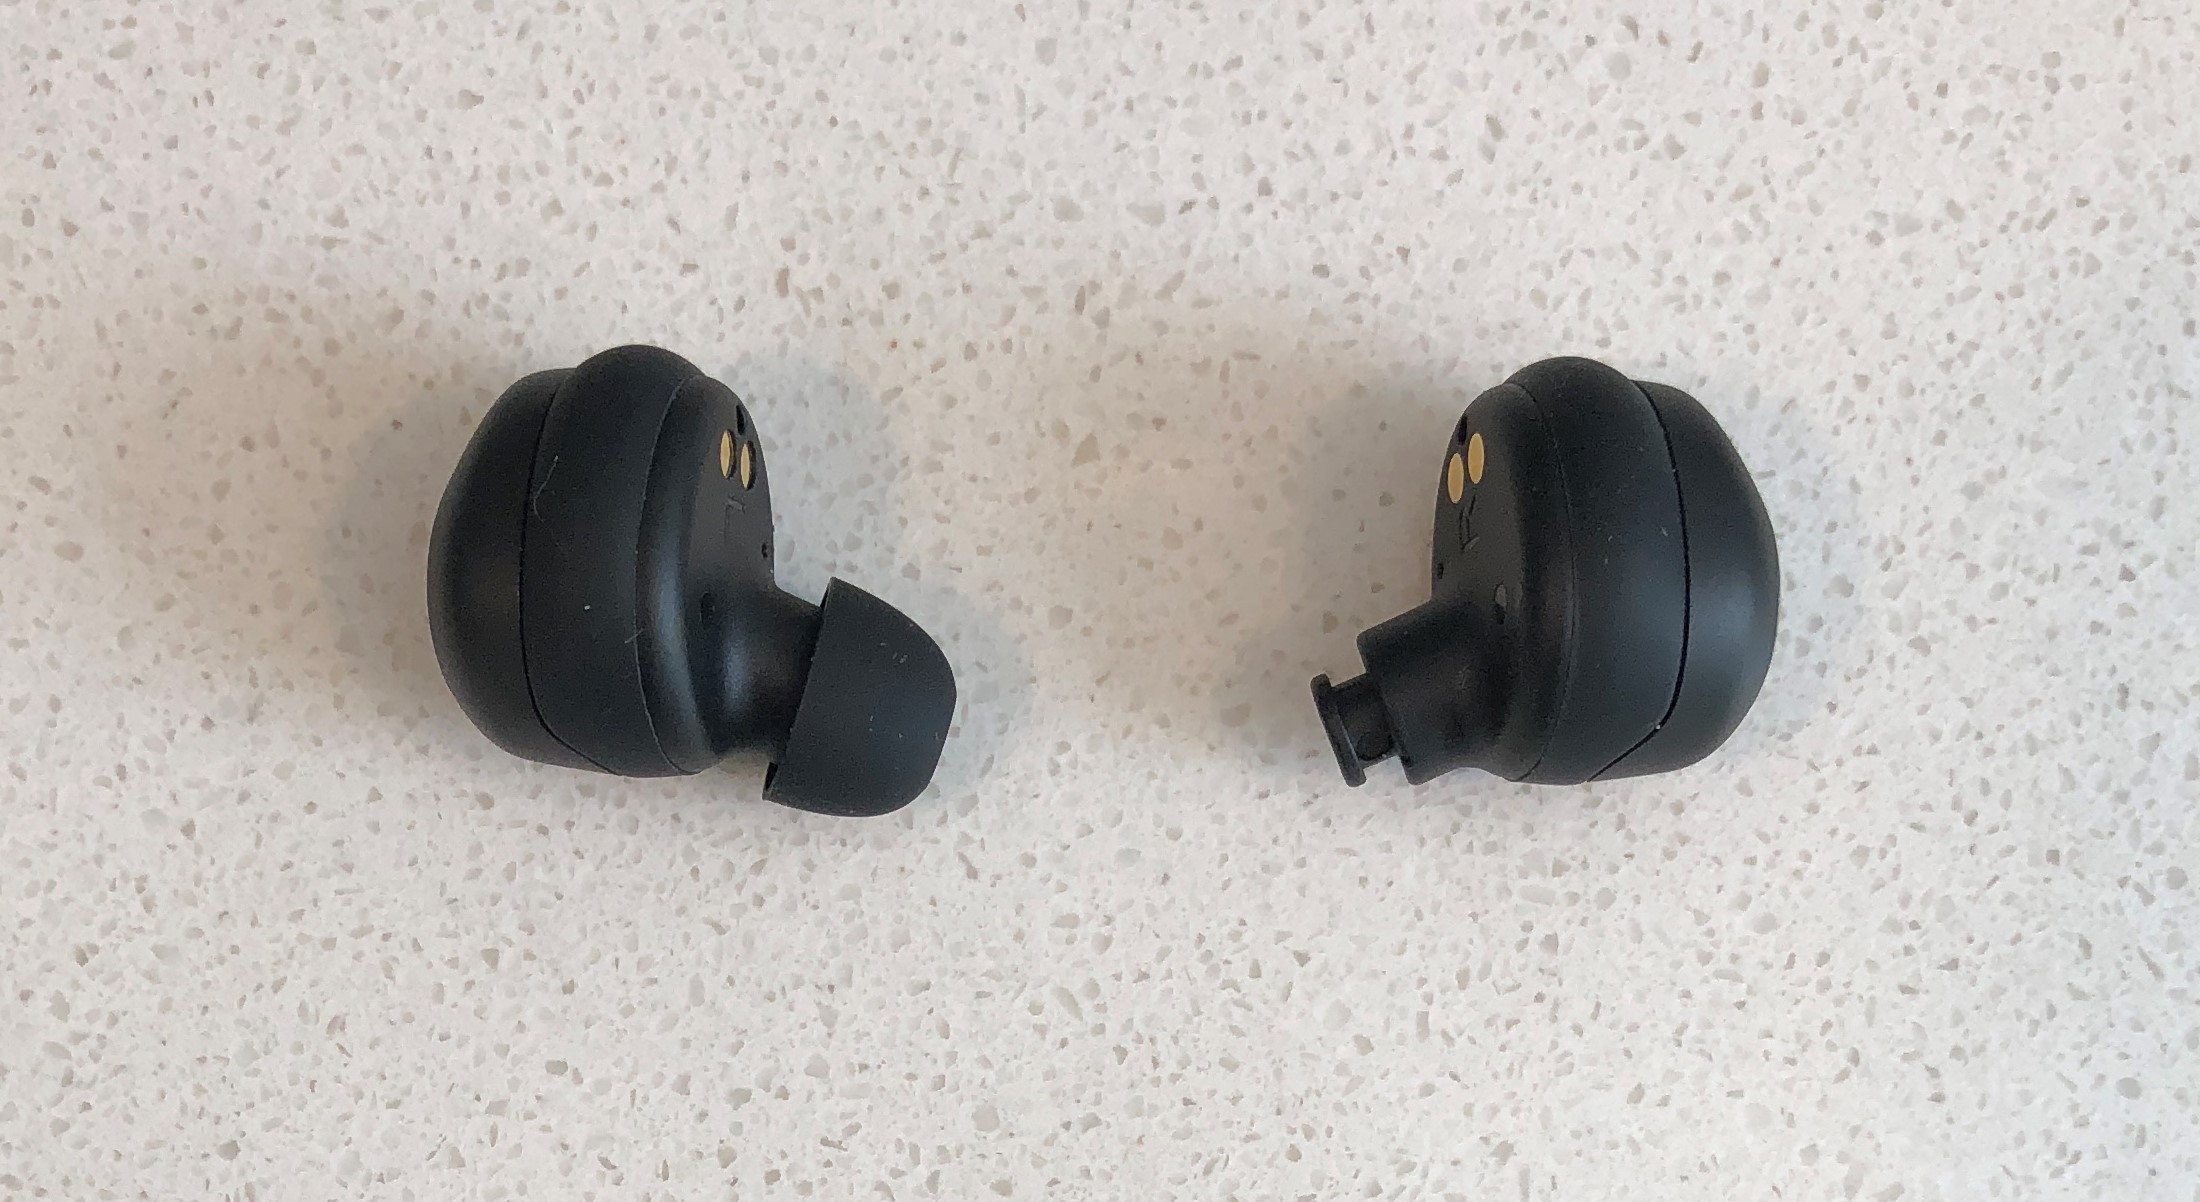 JLab JBuds Air Pro earbud tip and nozzle